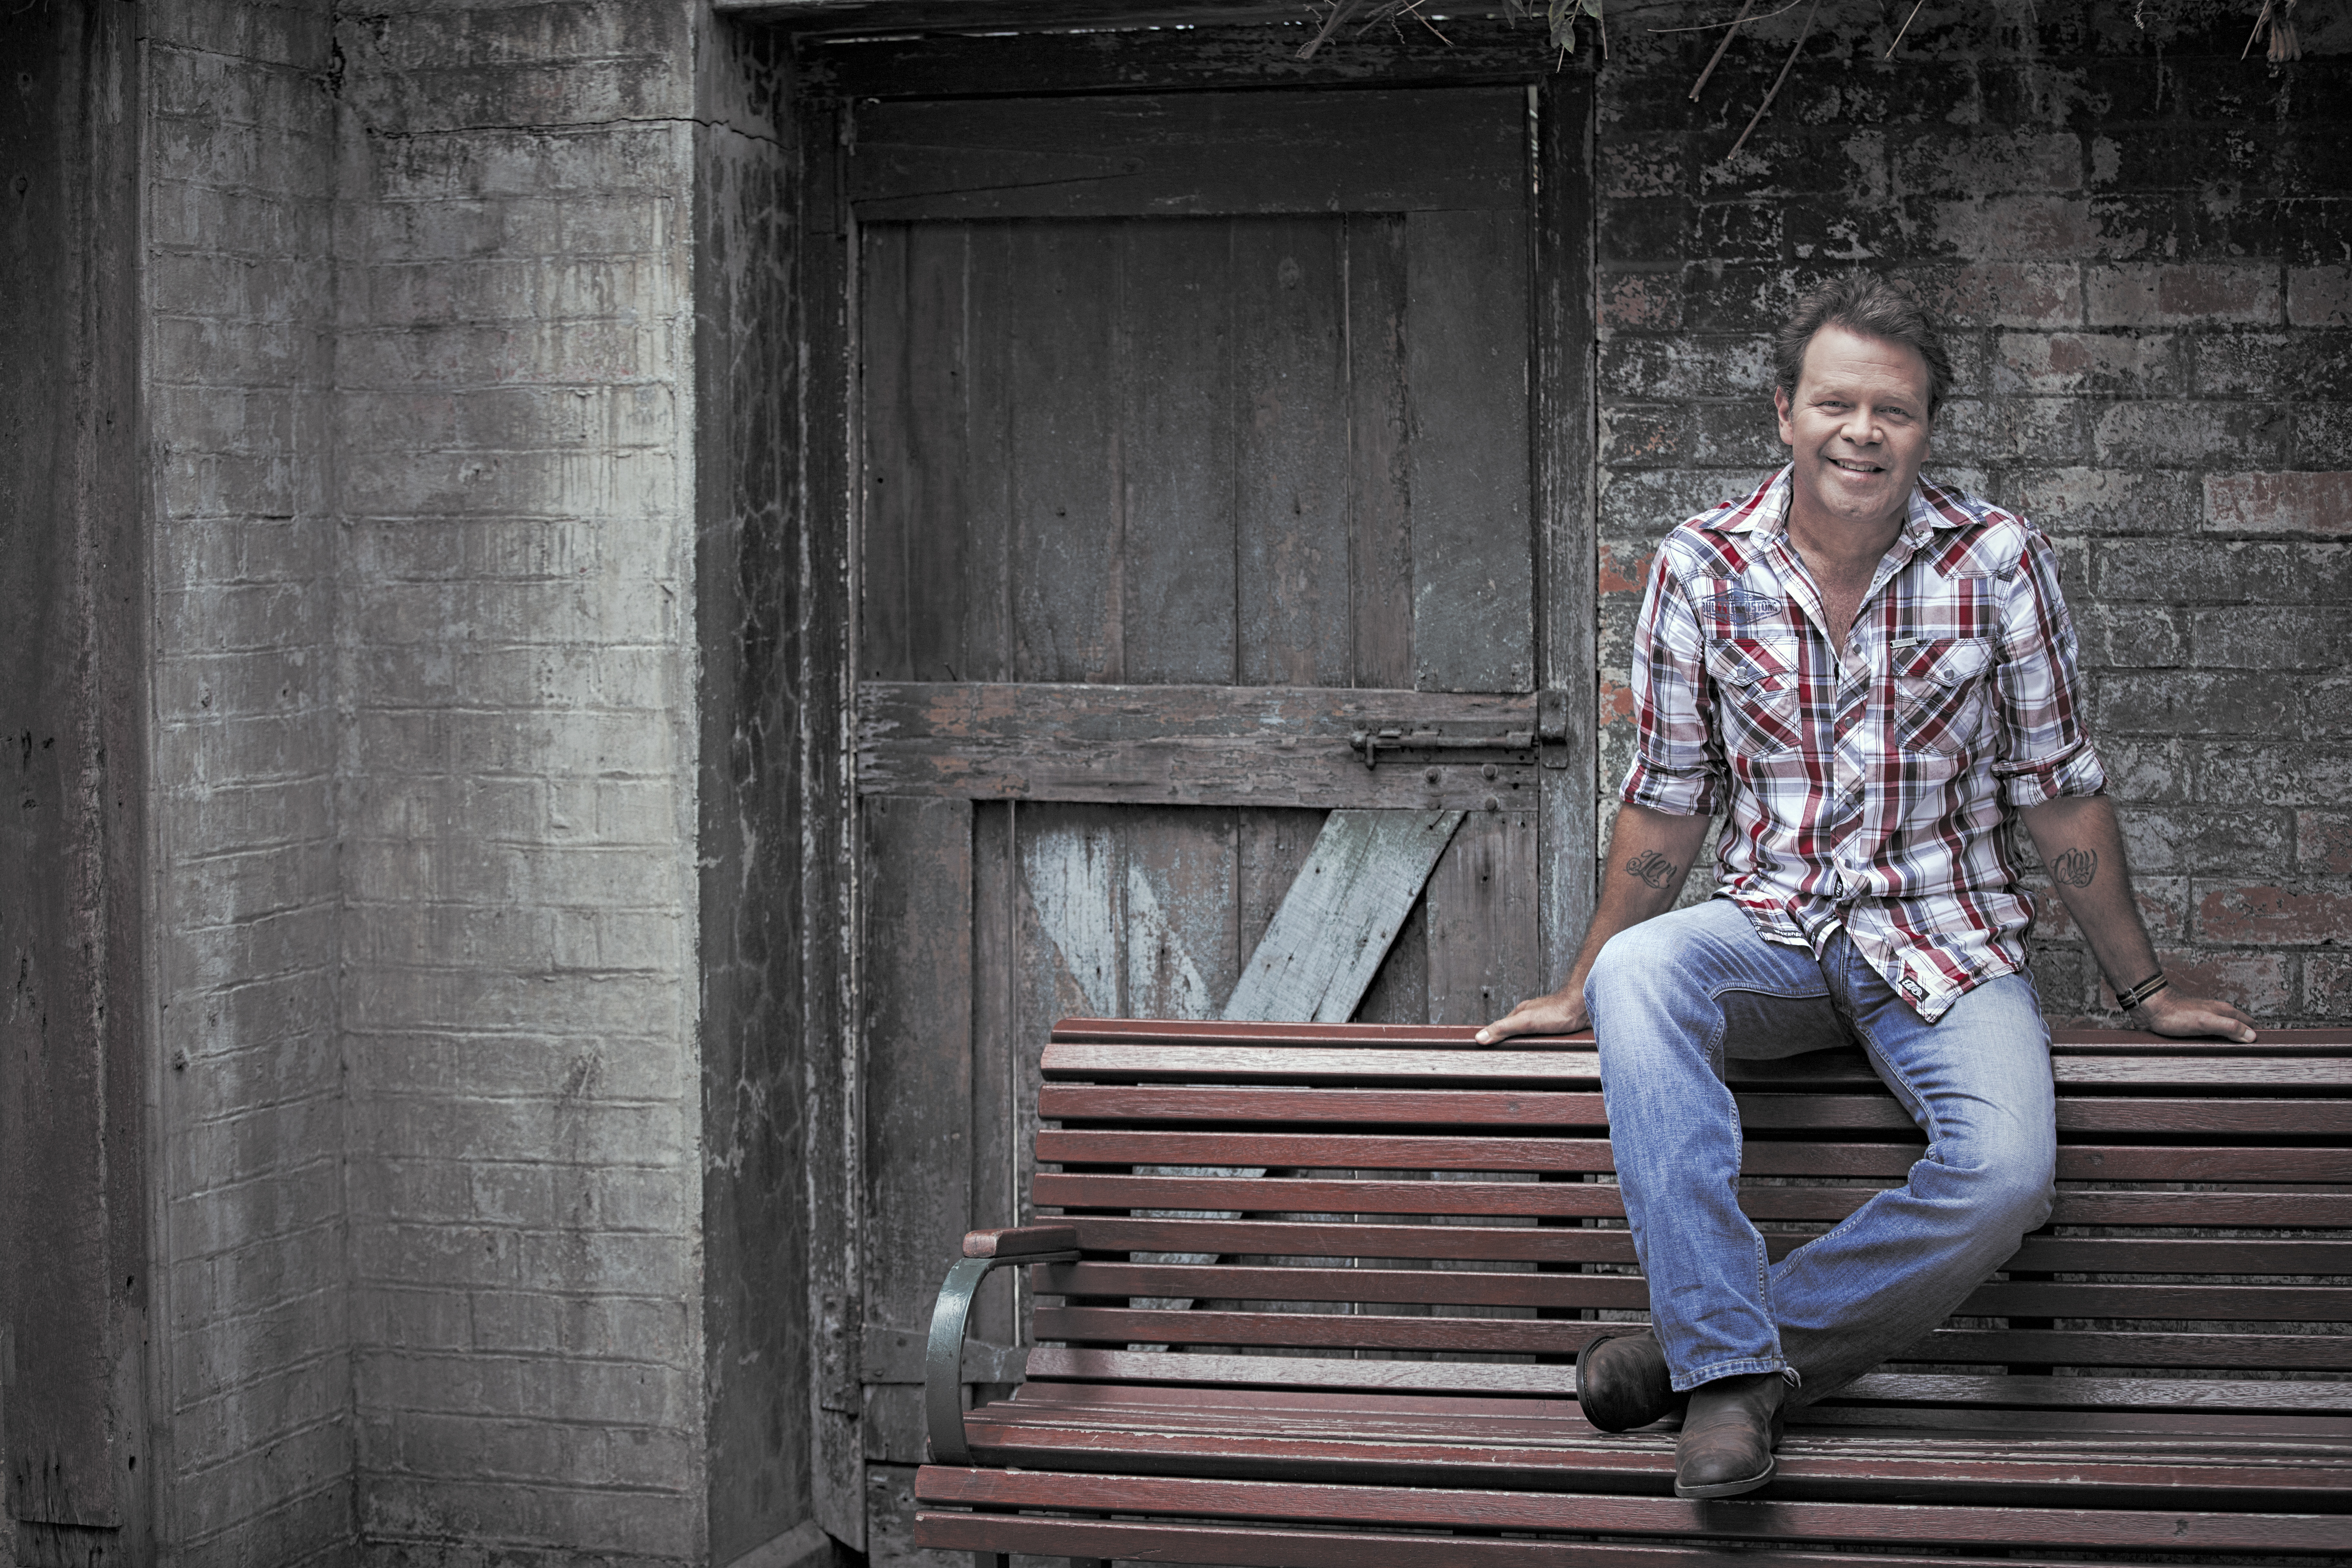 Troy Cassar-Daley enters agreement with Dan Hodges Music LLC